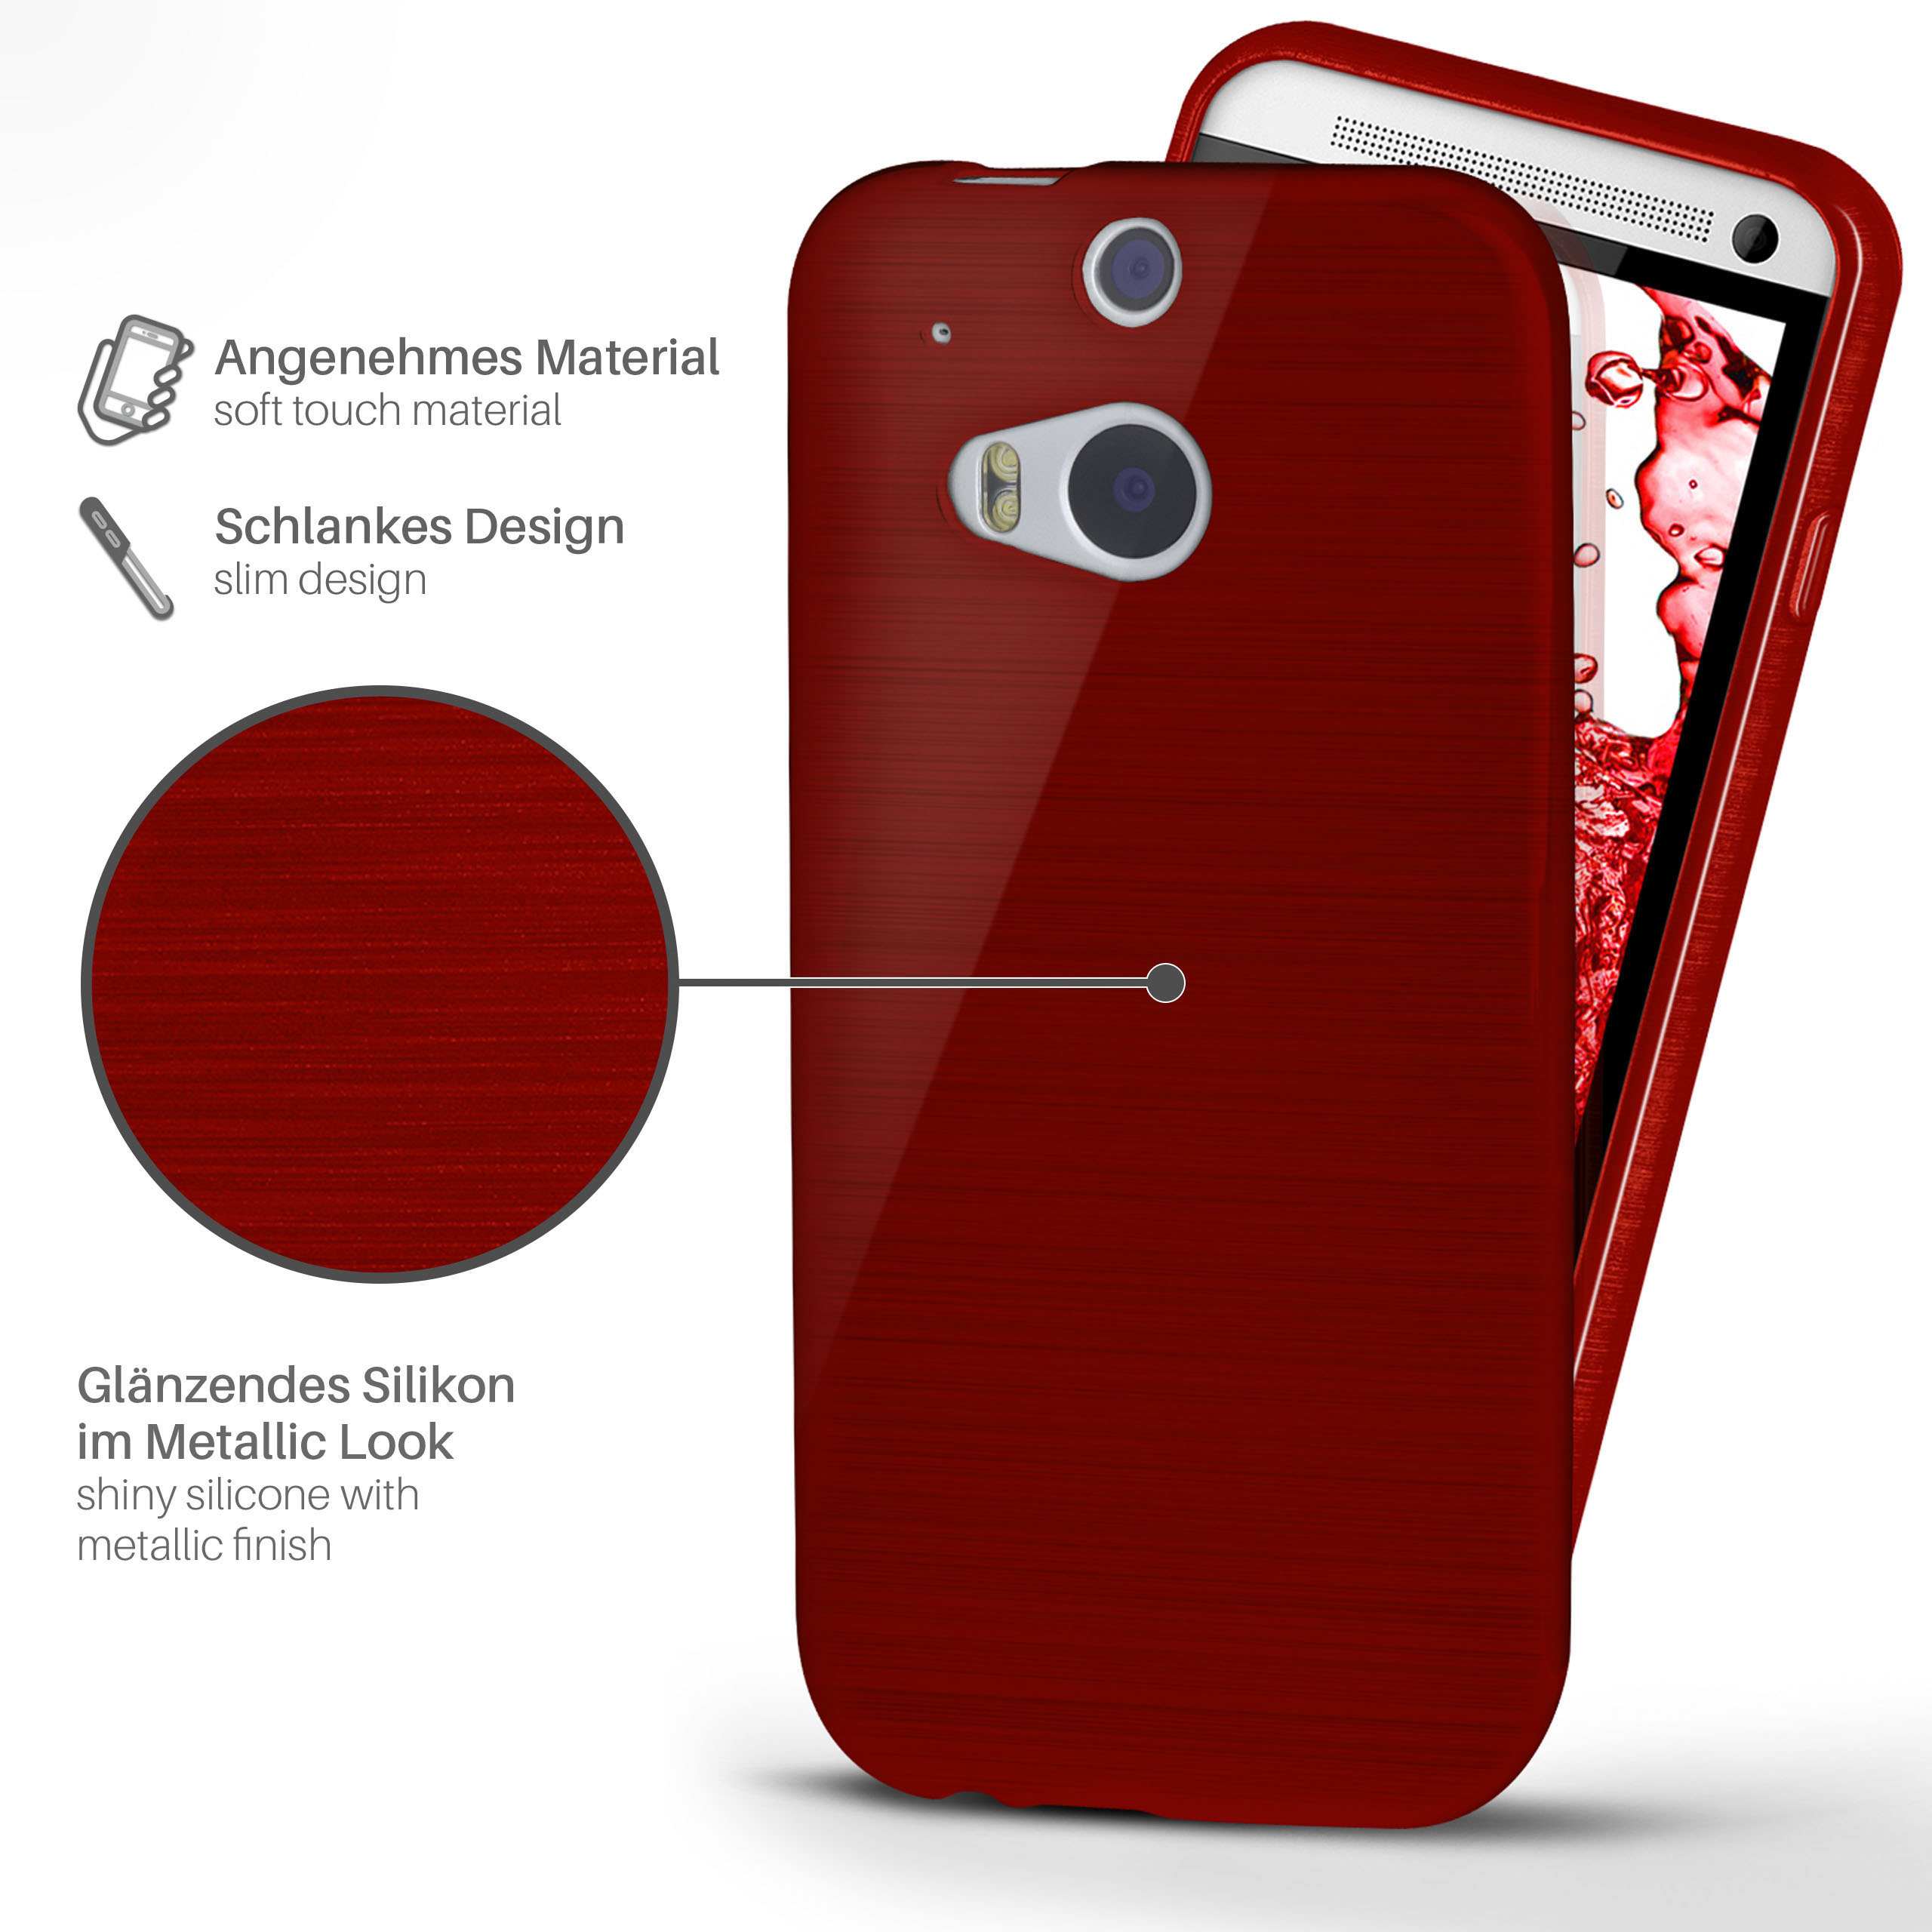 Brushed Backcover, M8 / M8s, MOEX One Crimson-Red Case, HTC,